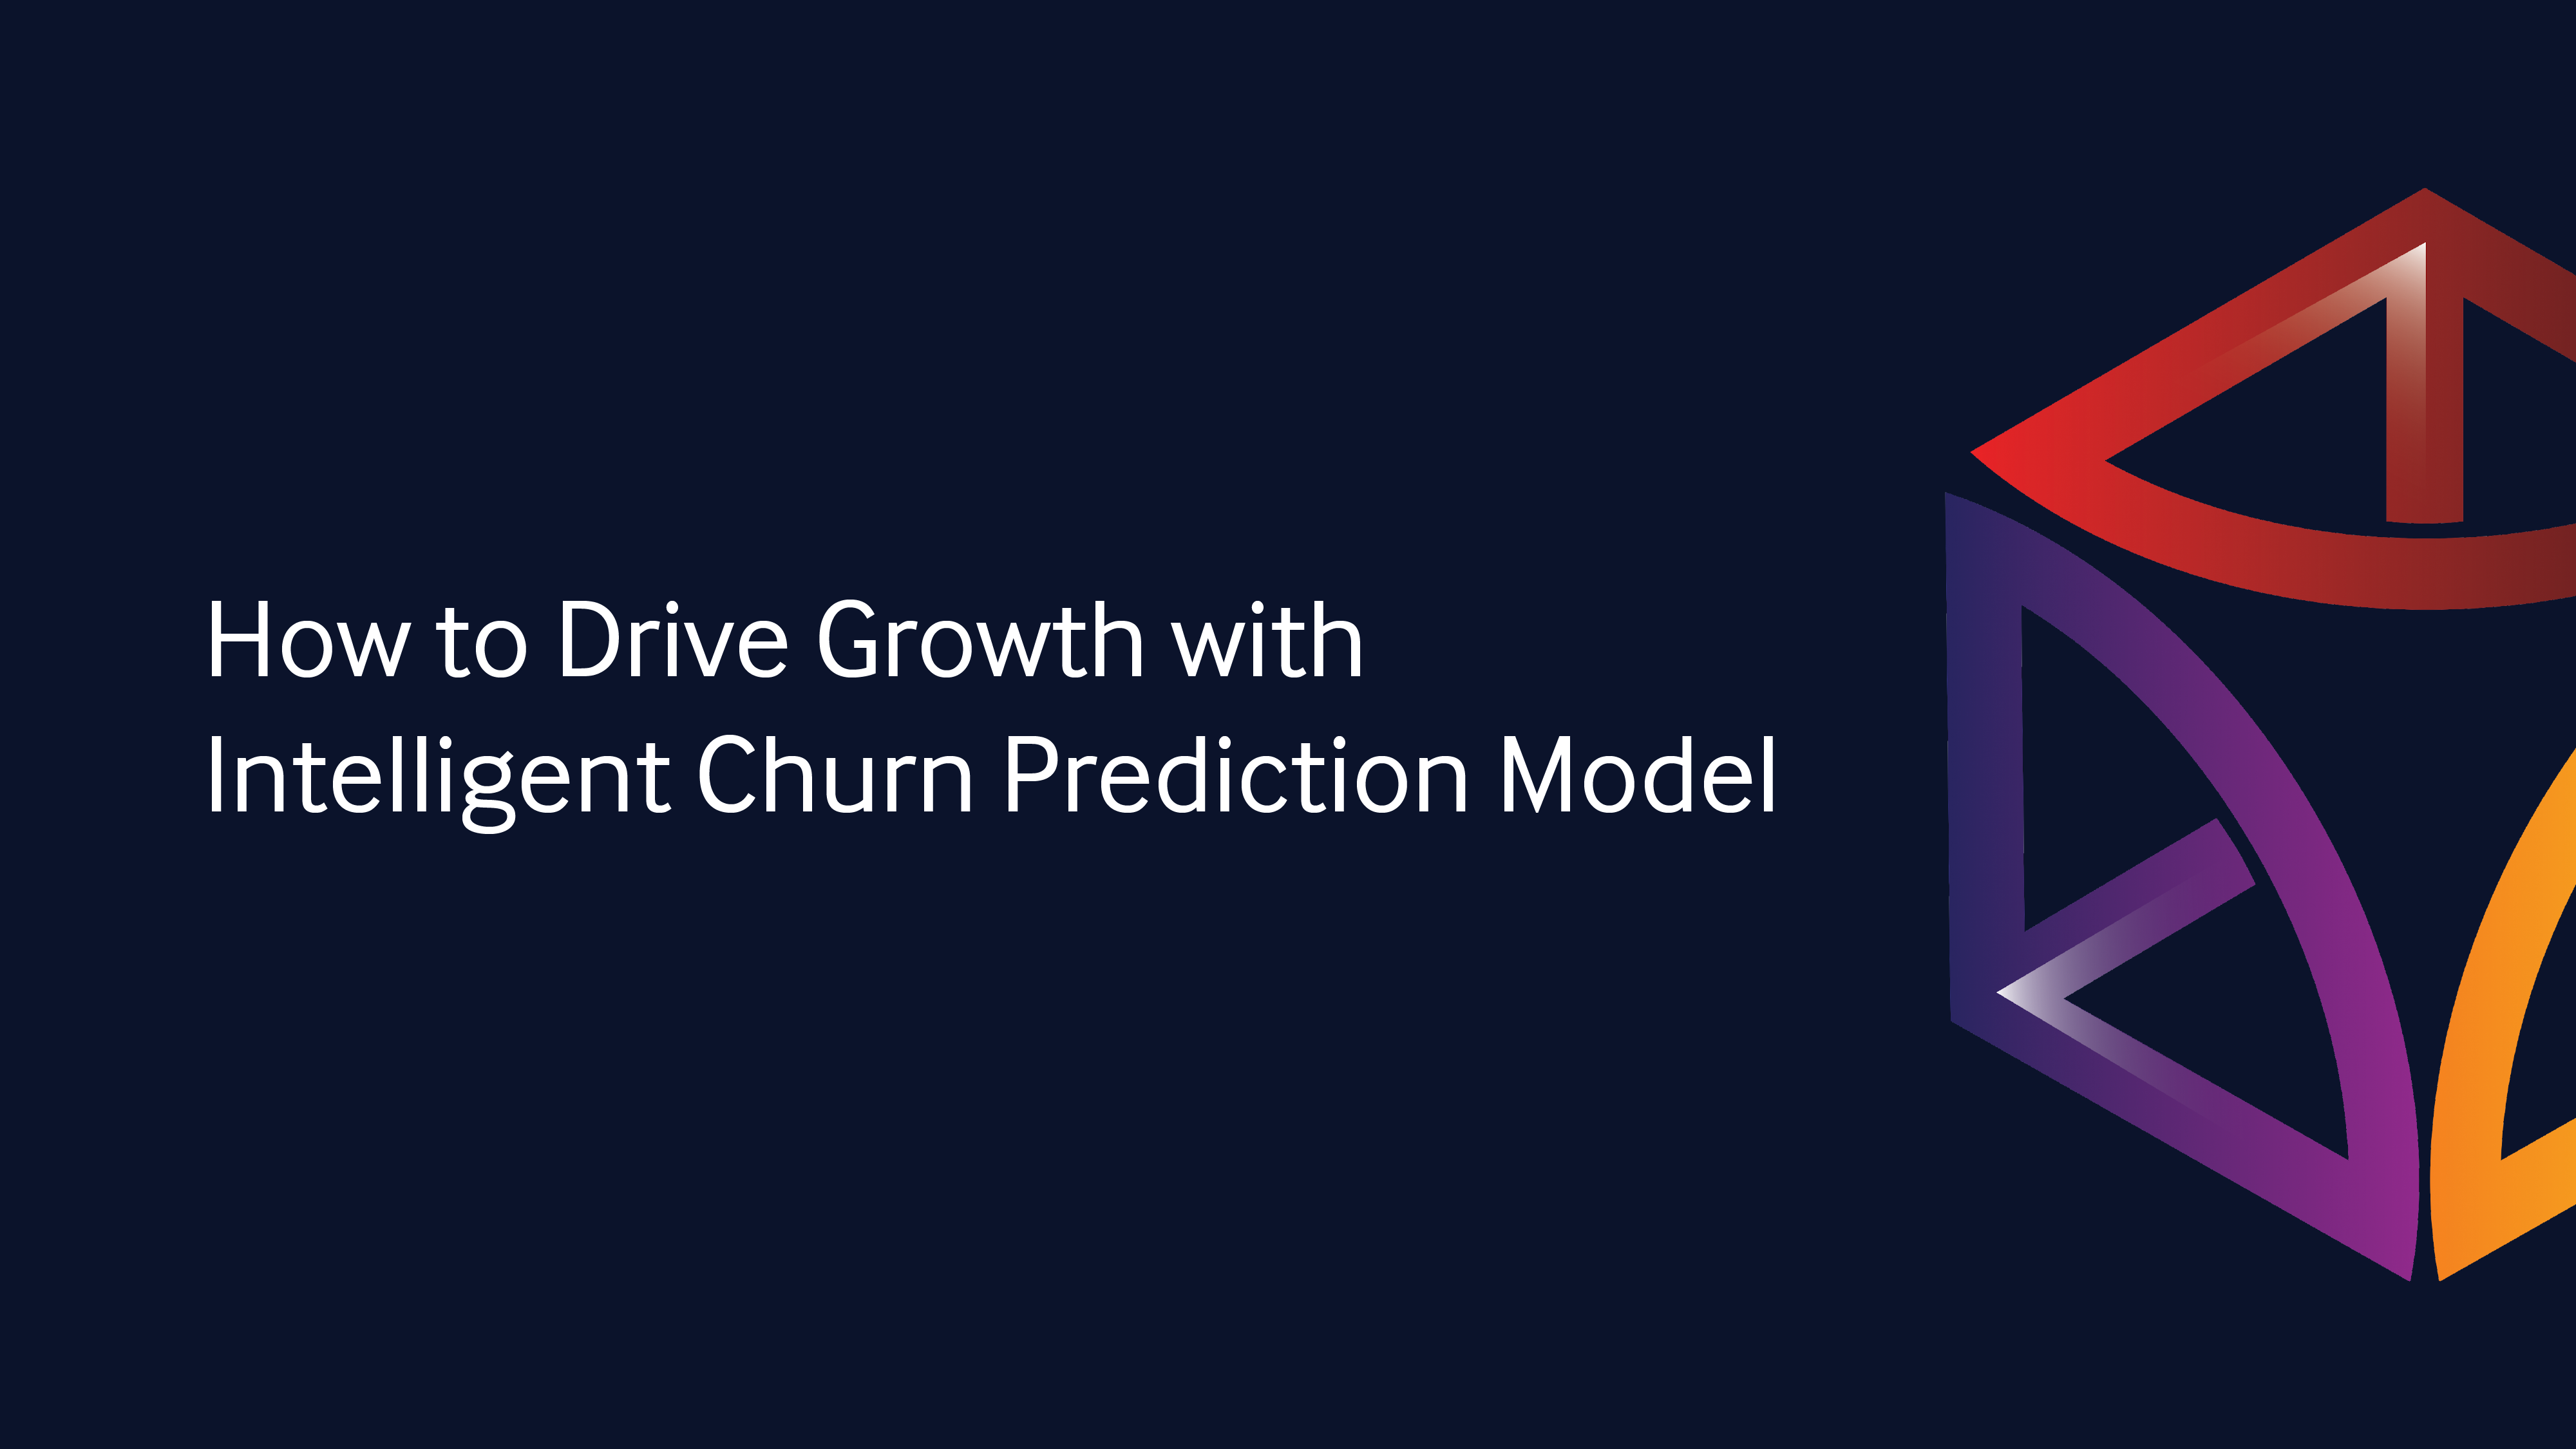 How to Drive Growth with Intelligent Churn Prediction Model